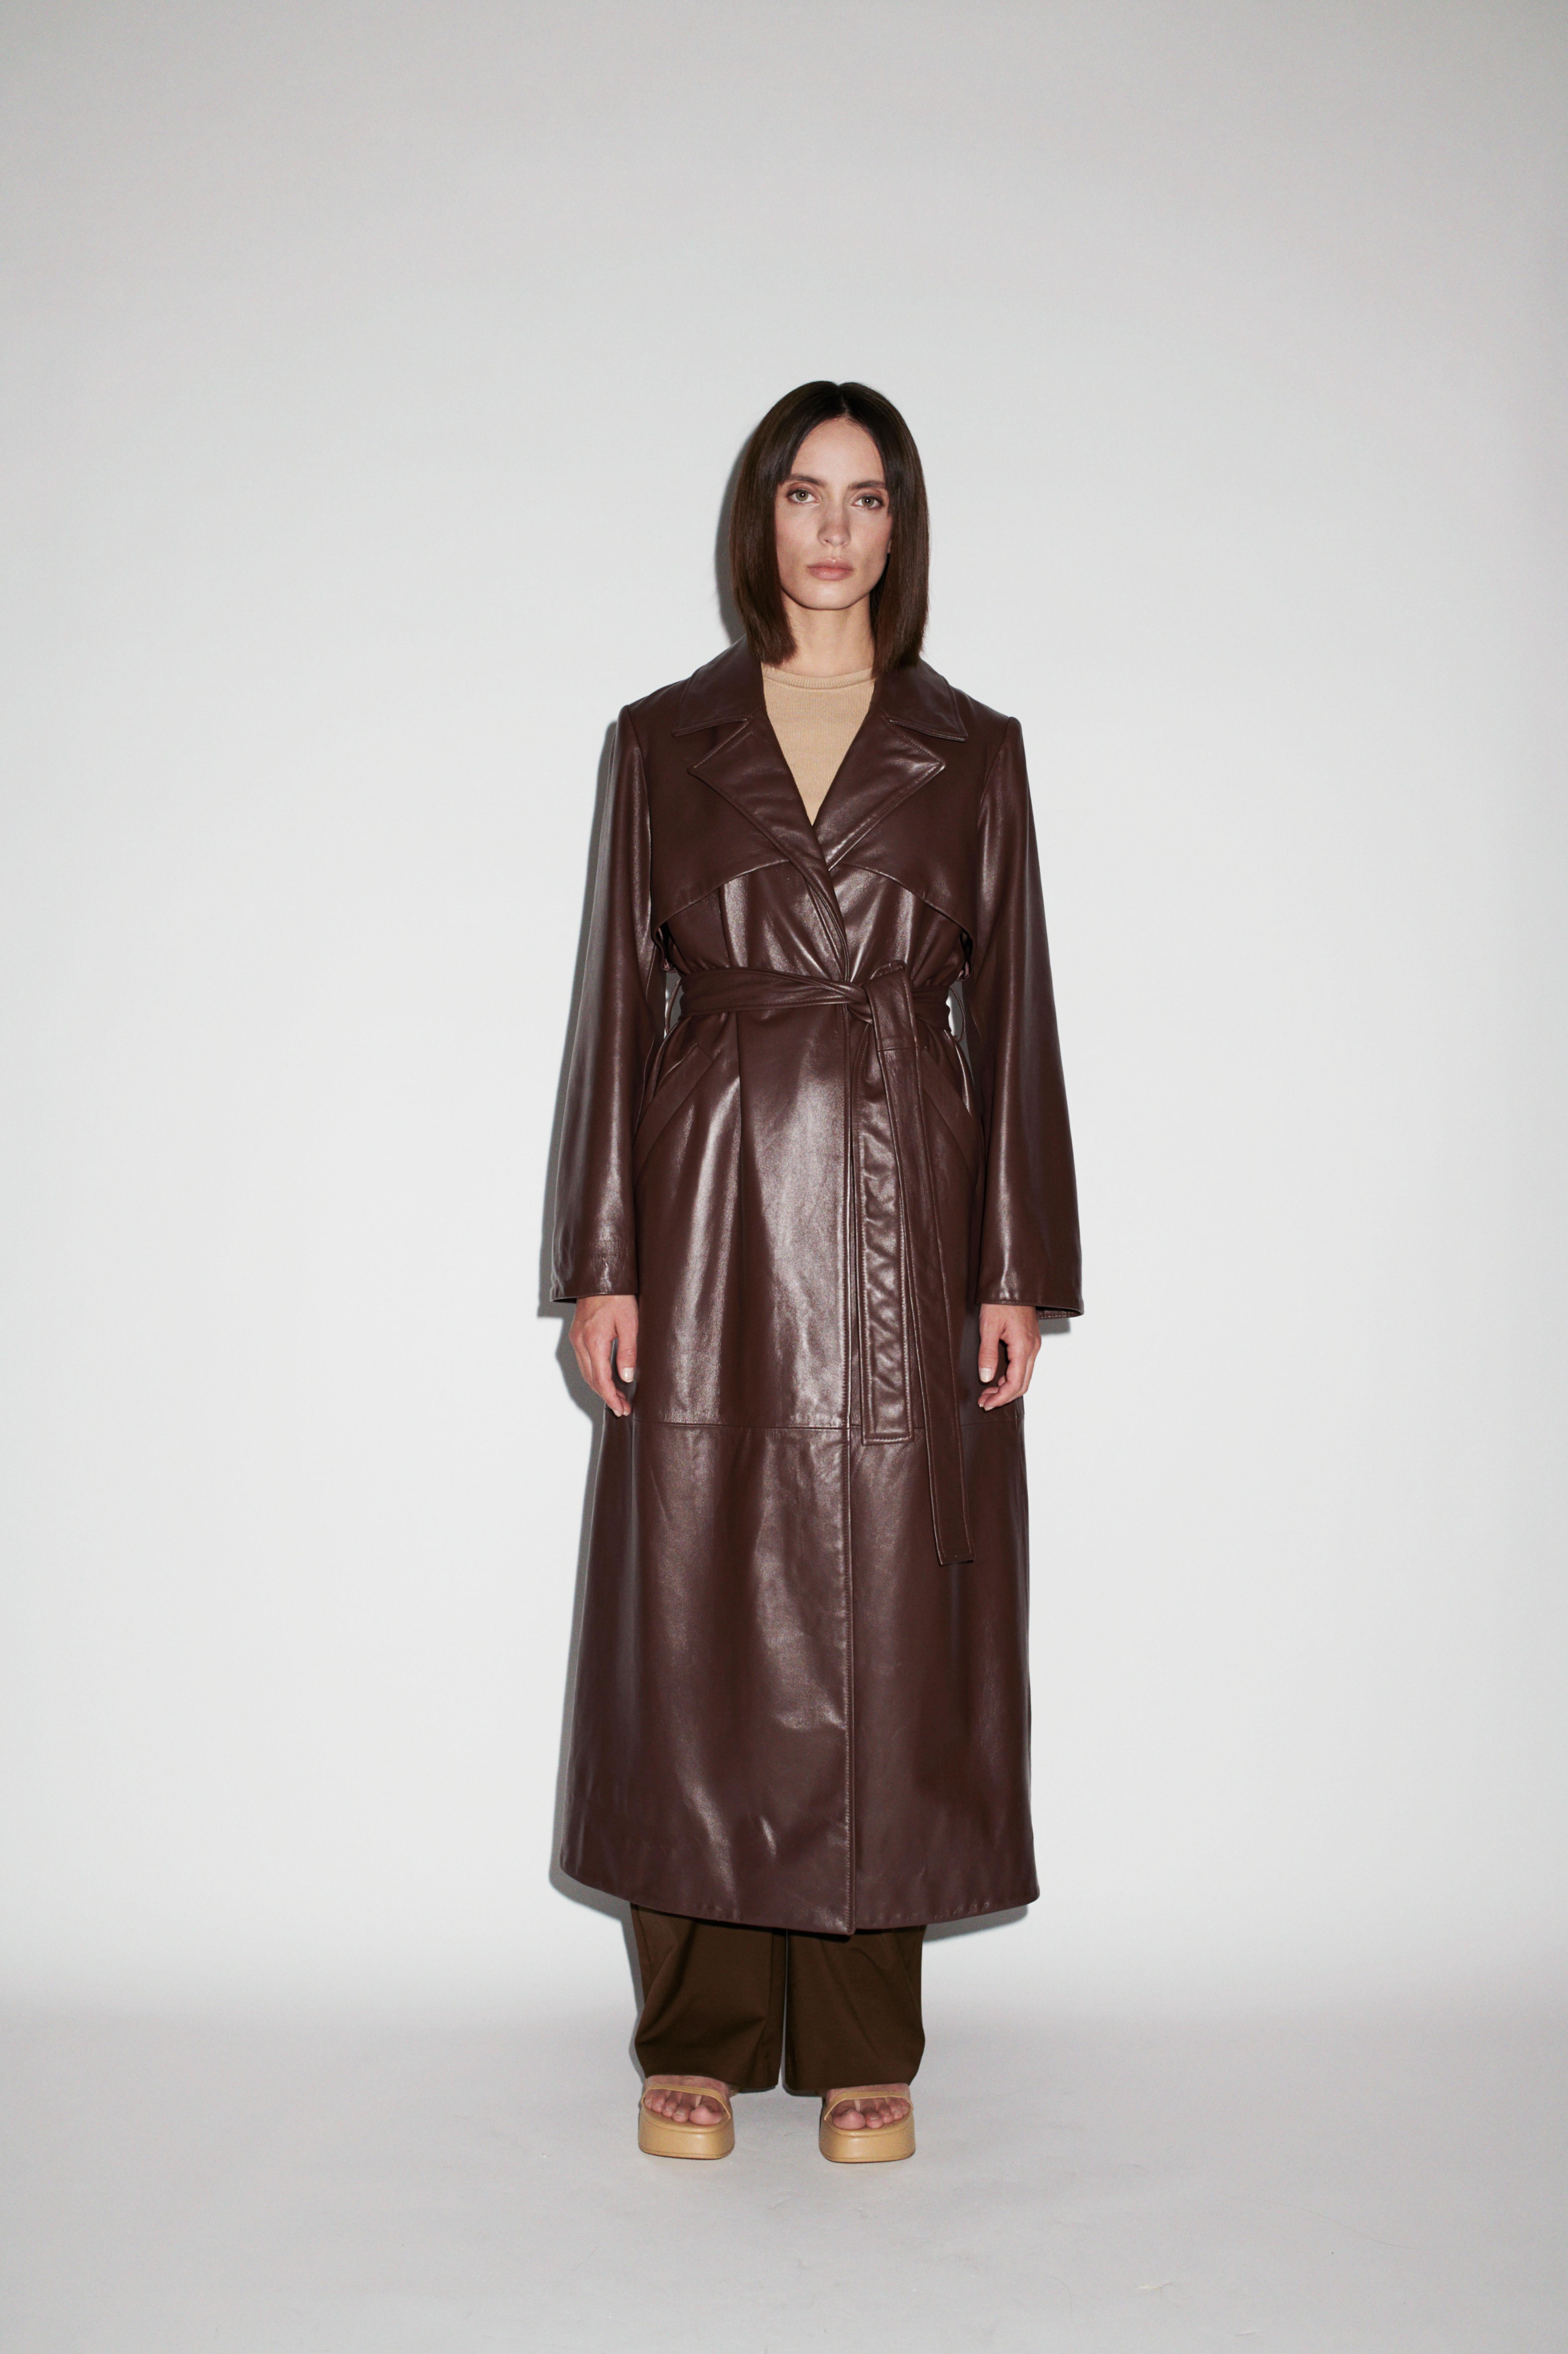 Handmade in London, made with 100% Italian Lambs Leather this luxury item is an investment piece to wear for a lifetime.  This piece is made by artisans in London, expert artisans who make for the top luxury brands. This is a coat to treasure for a